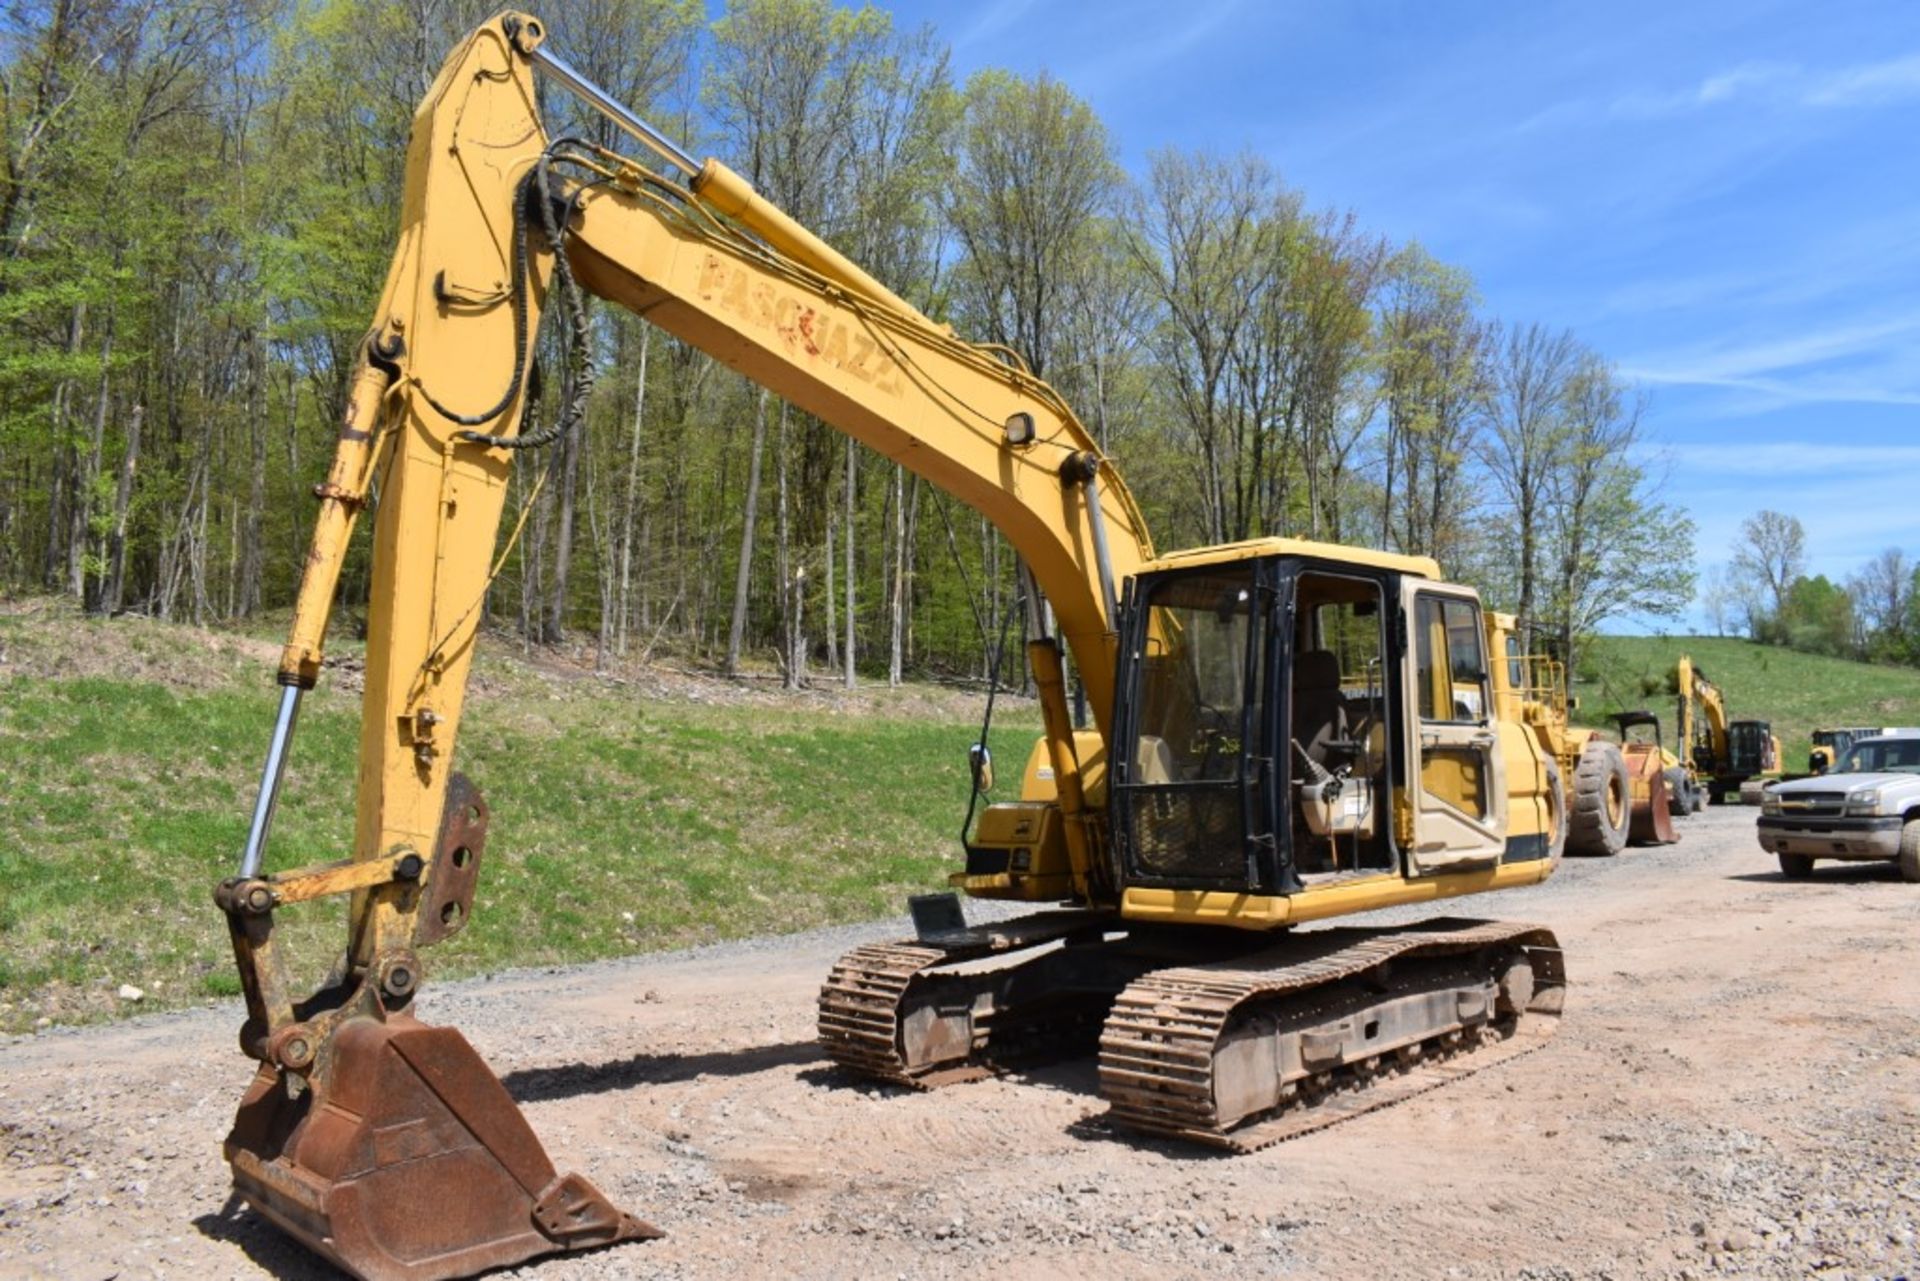 CAT 312B Excavator 11114 Hours, Runs and Operates, 48" Bucket, Auxiliary Hydraulics, Quick Coupler